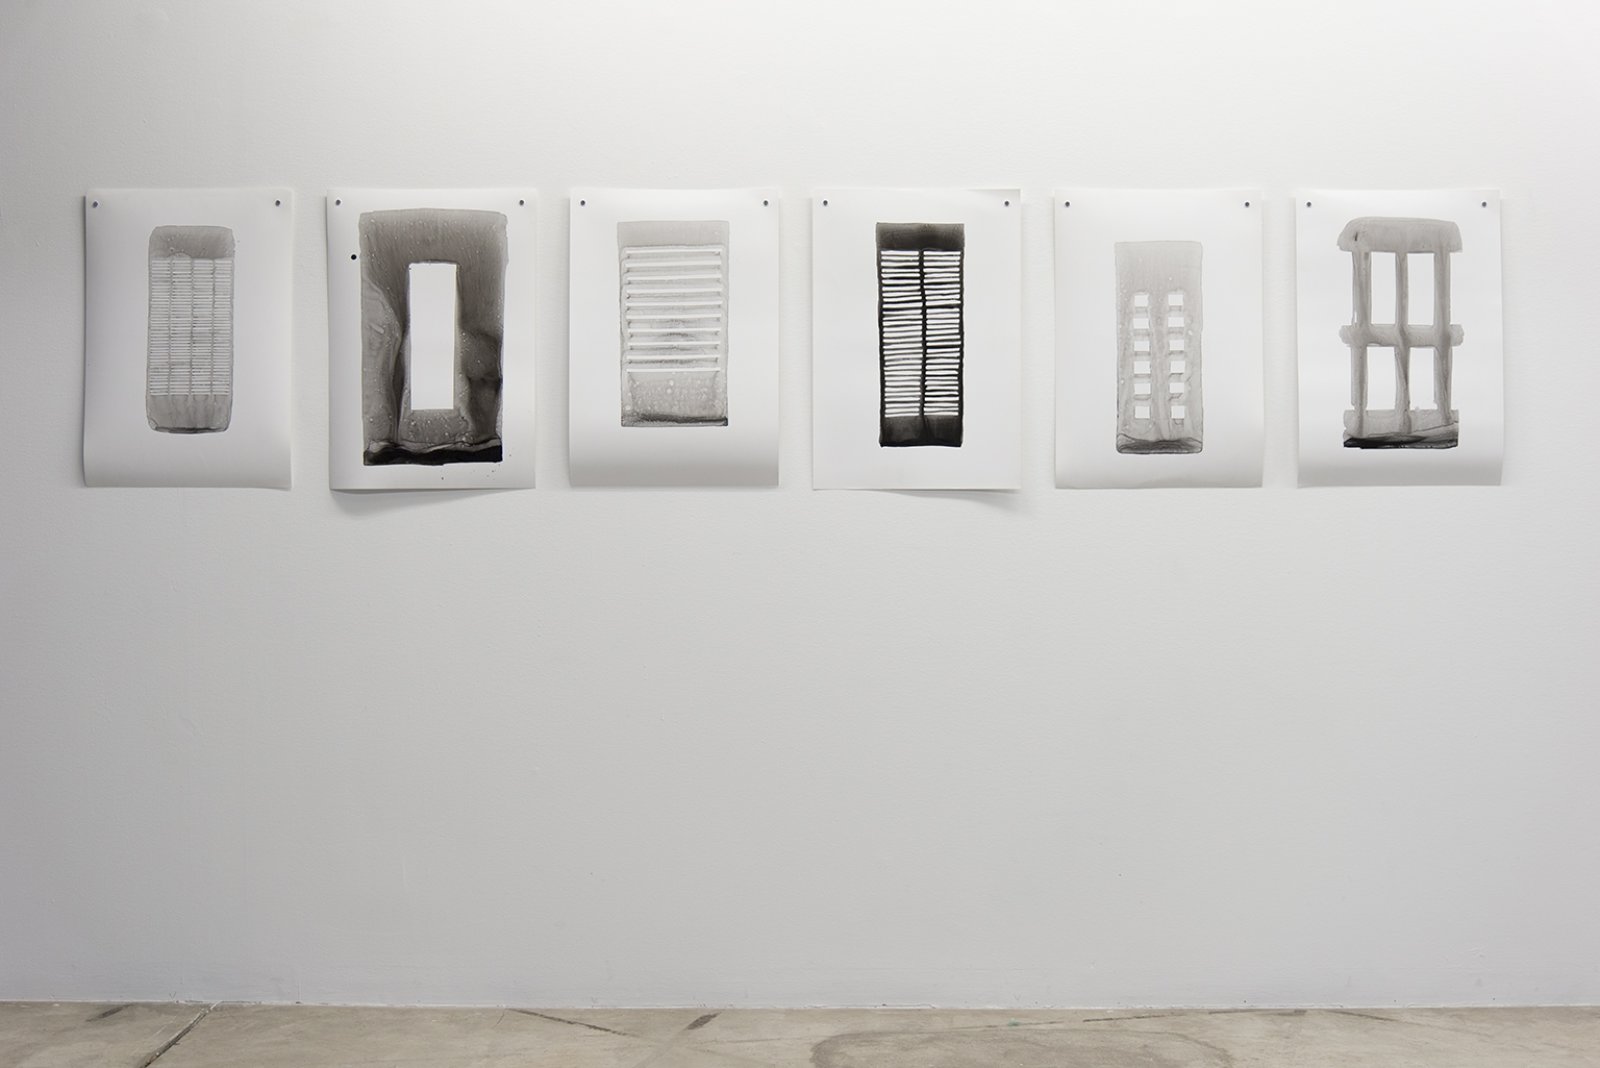 Abbas Akhavan, Untitled, 2013–ongoing, ink on photo-degradable stone paper, each 25 x 17 in. (63 x 44 cm)